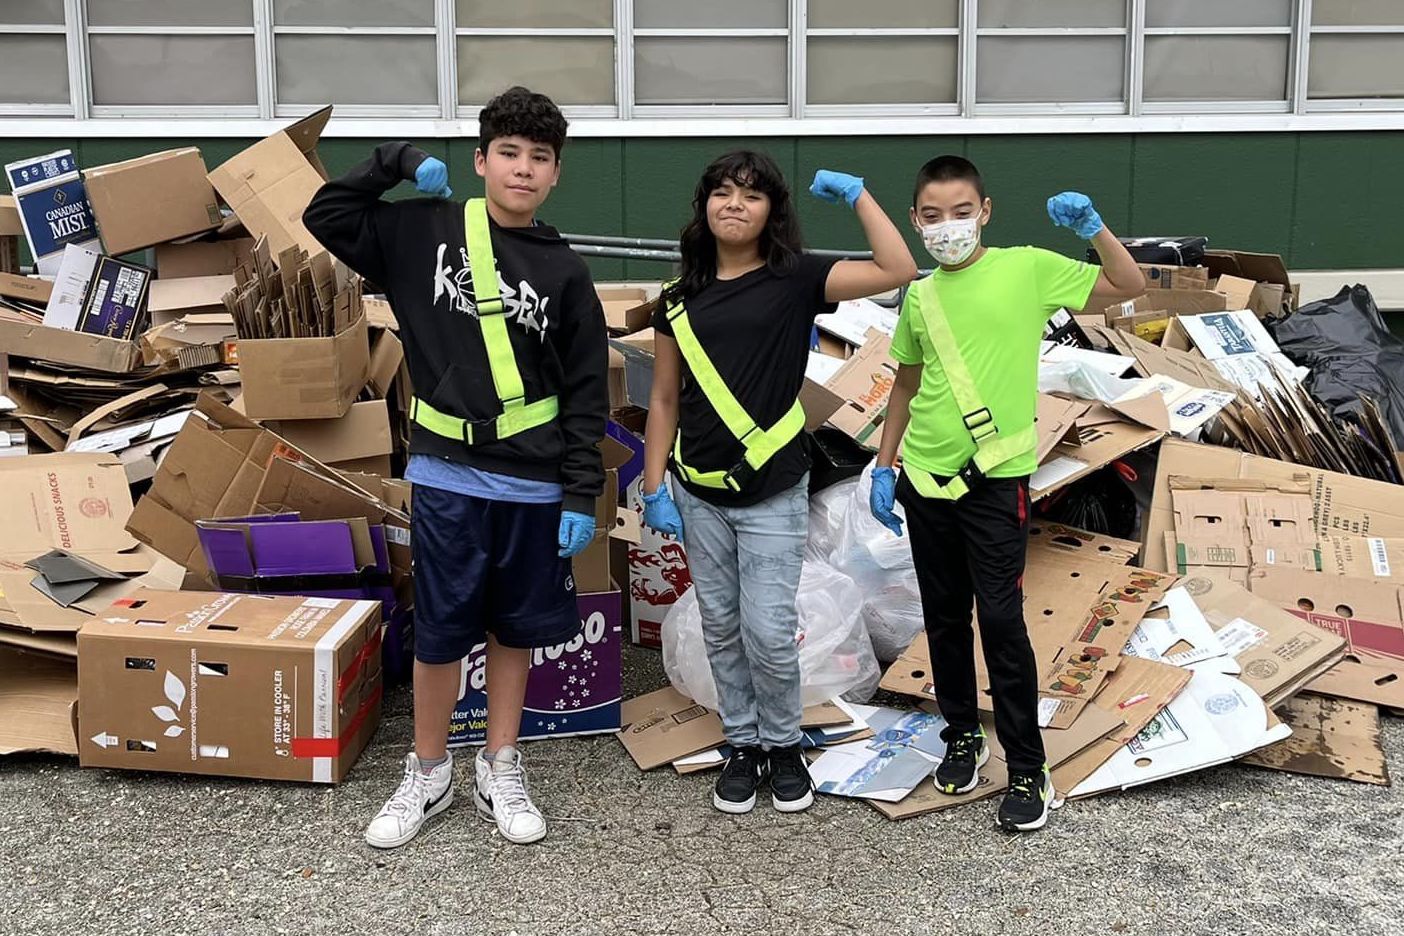 Huppertz students with cardboard boxes